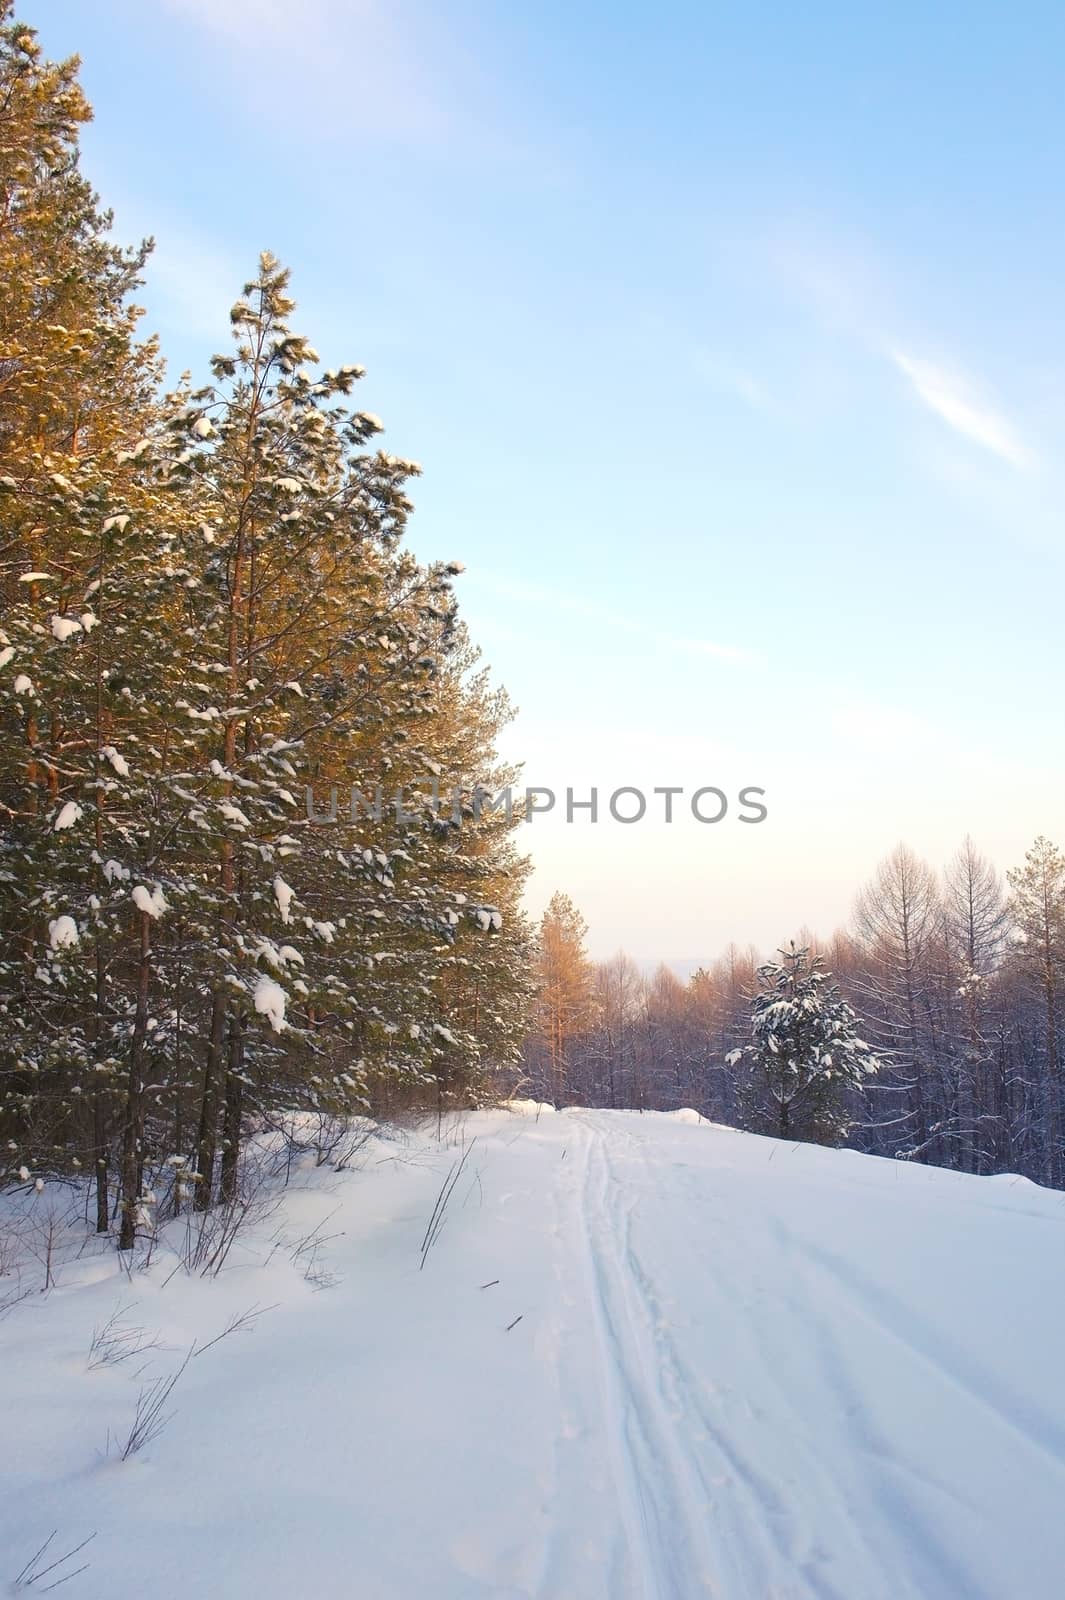 Evening winter landscape in forest with pines